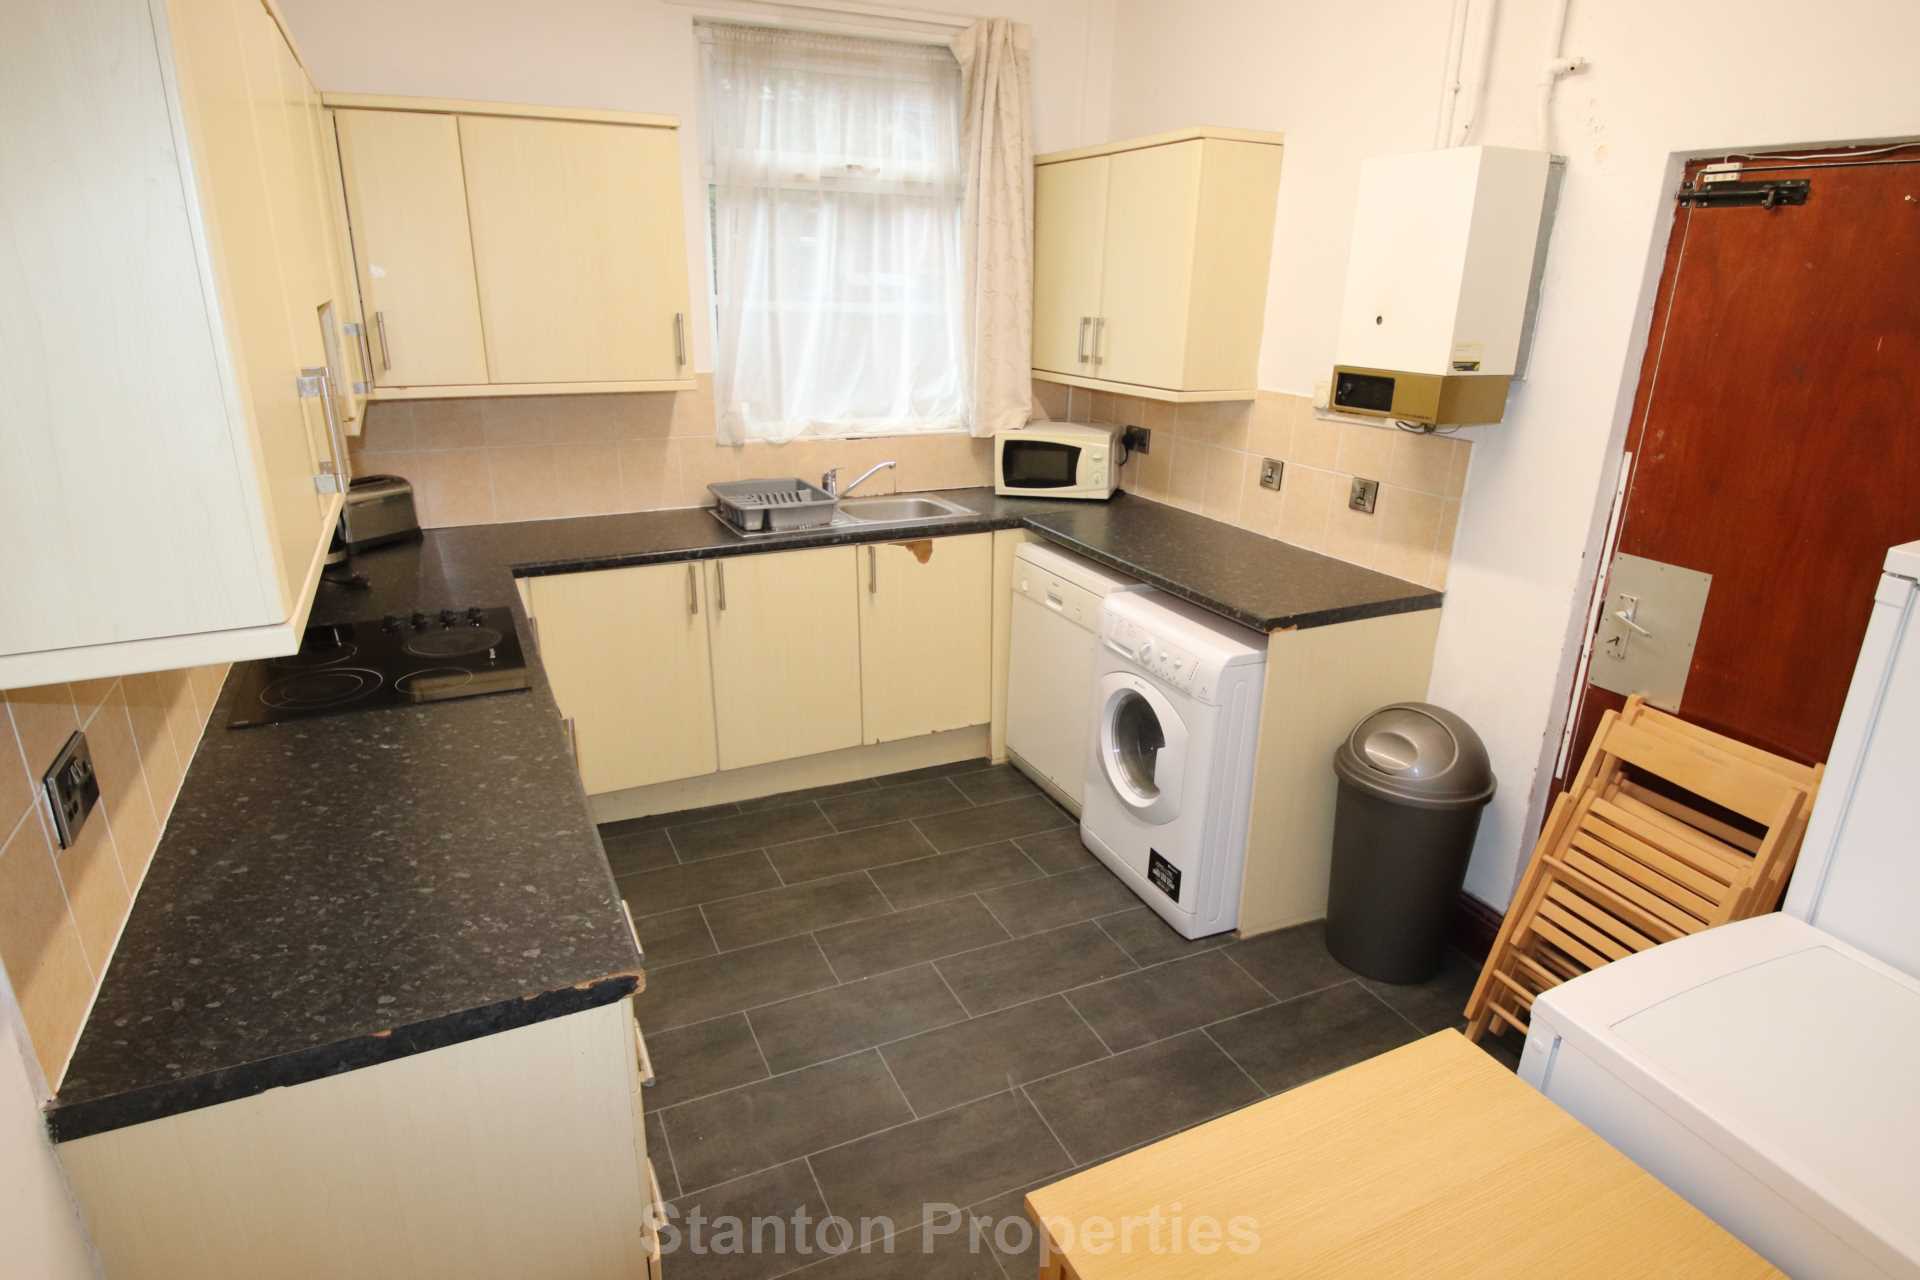 See Video Tour, £115 pppw, Moseley Road, Fallowfield, M14 6PB, Image 4